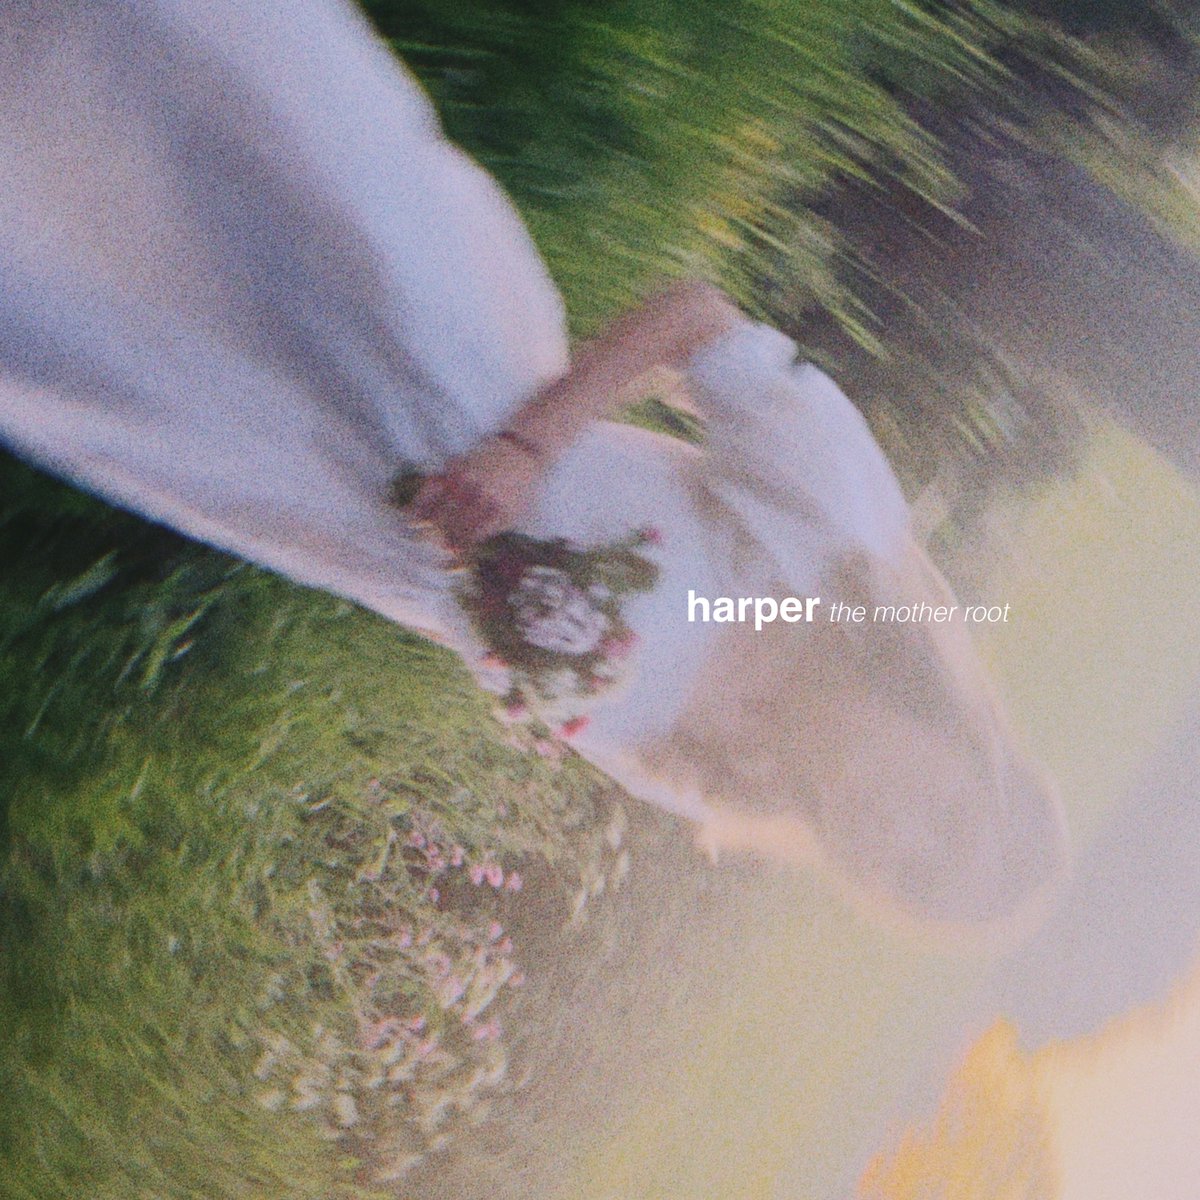 𝐡𝐚𝐫𝐩𝐞𝐫 - '𝐭𝐡𝐞 𝐦𝐨𝐭𝐡𝐞𝐫 𝐫𝐨𝐨𝐭' happy release to harper and their debut album 'the mother root' which is OUT NOW! 🙌✨ listen to their beautiful dream-pop digitally and on limited edition cassette via bandcamp! deviltowntapes.bandcamp.com/album/the-moth…